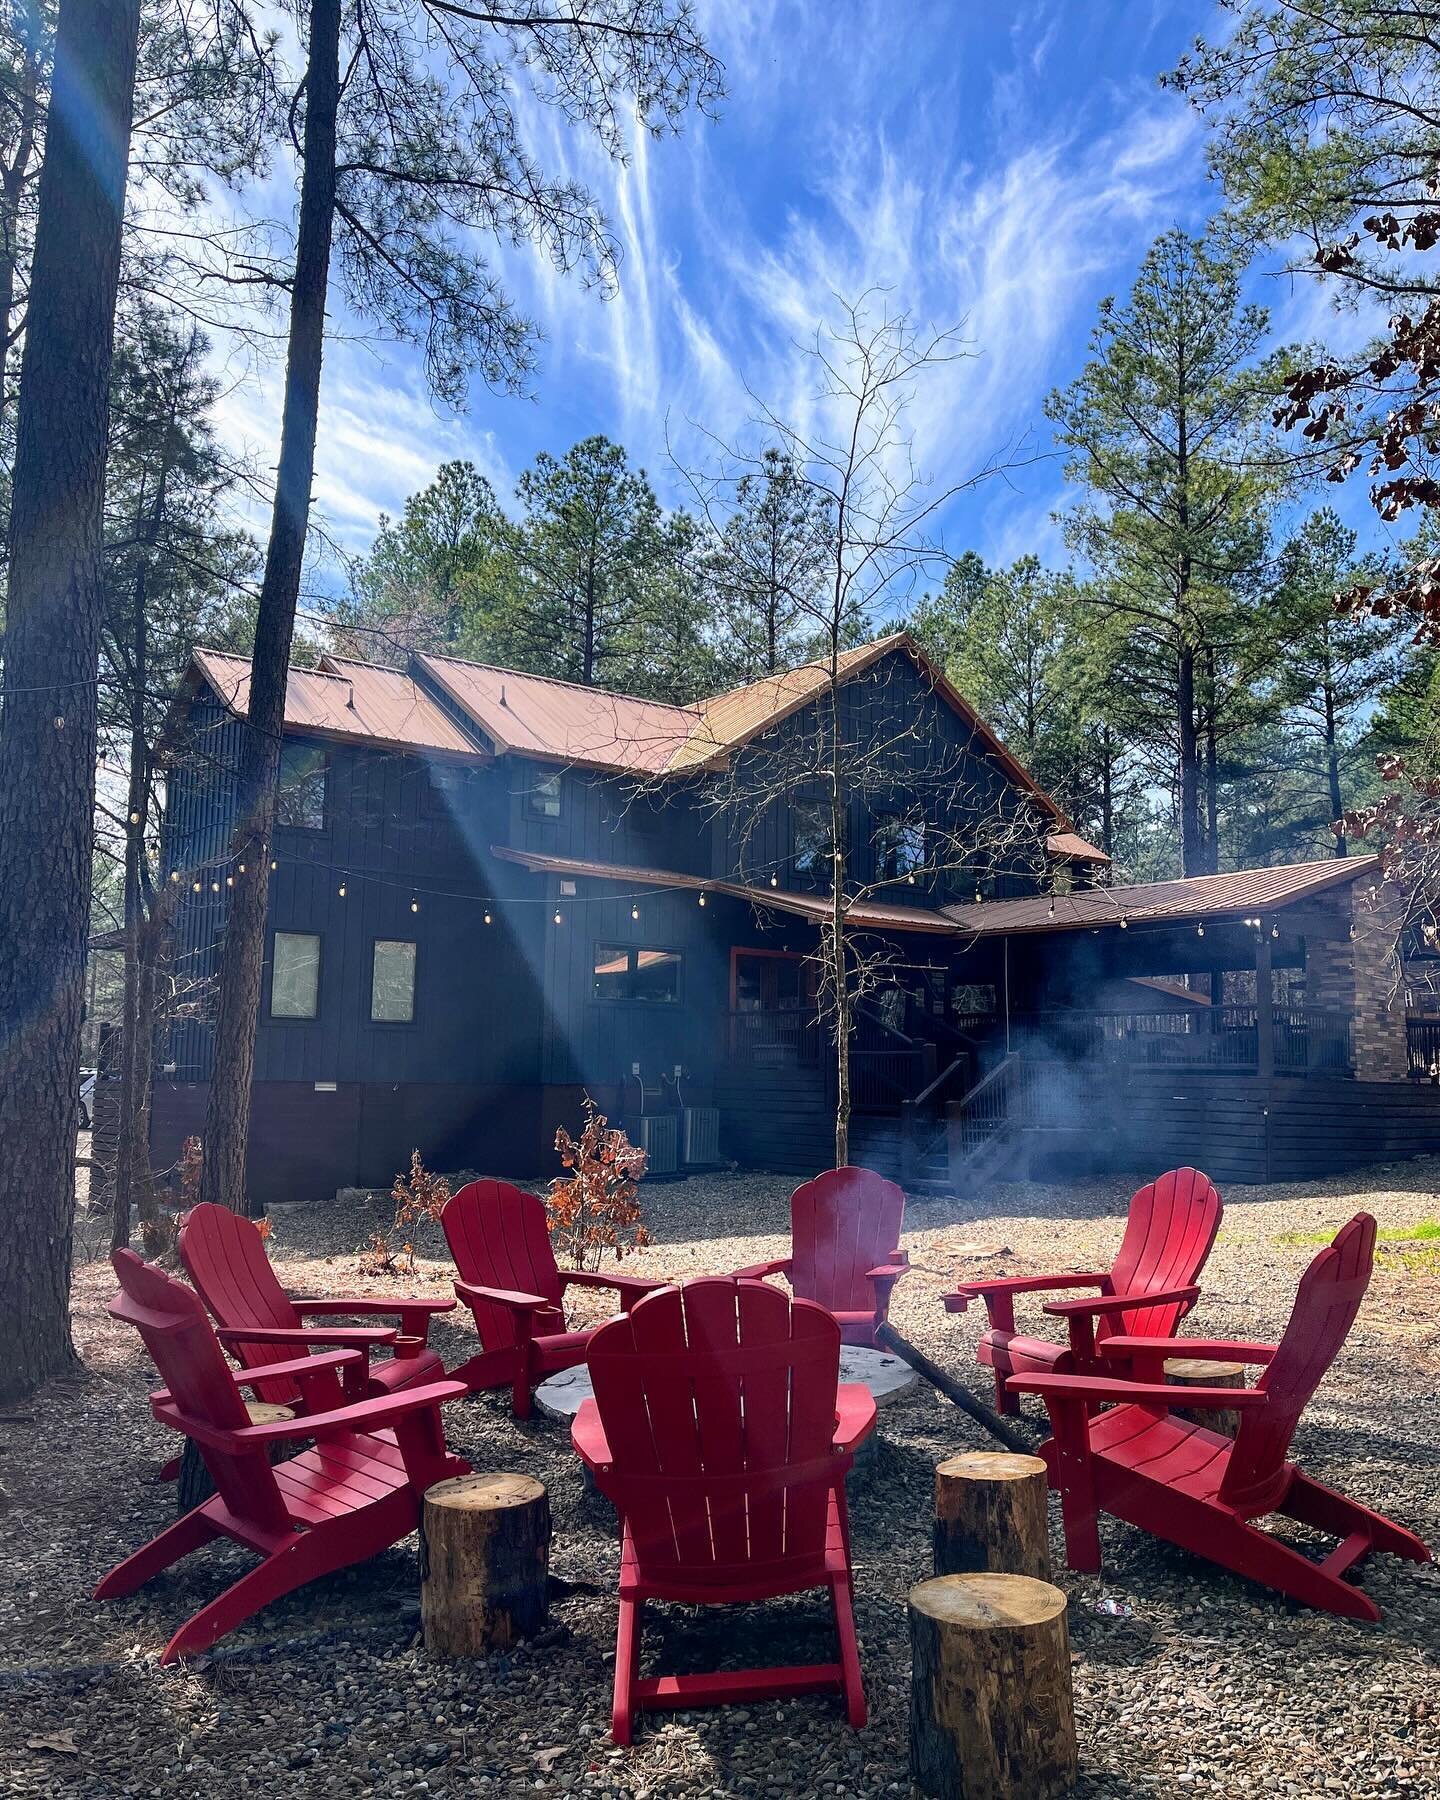 our first trip to broken bow with friends was a success! 🥾 the weather was perfect for hiking and hot tubbing and marshmallow roasting. the kids can&rsquo;t wait to go back!